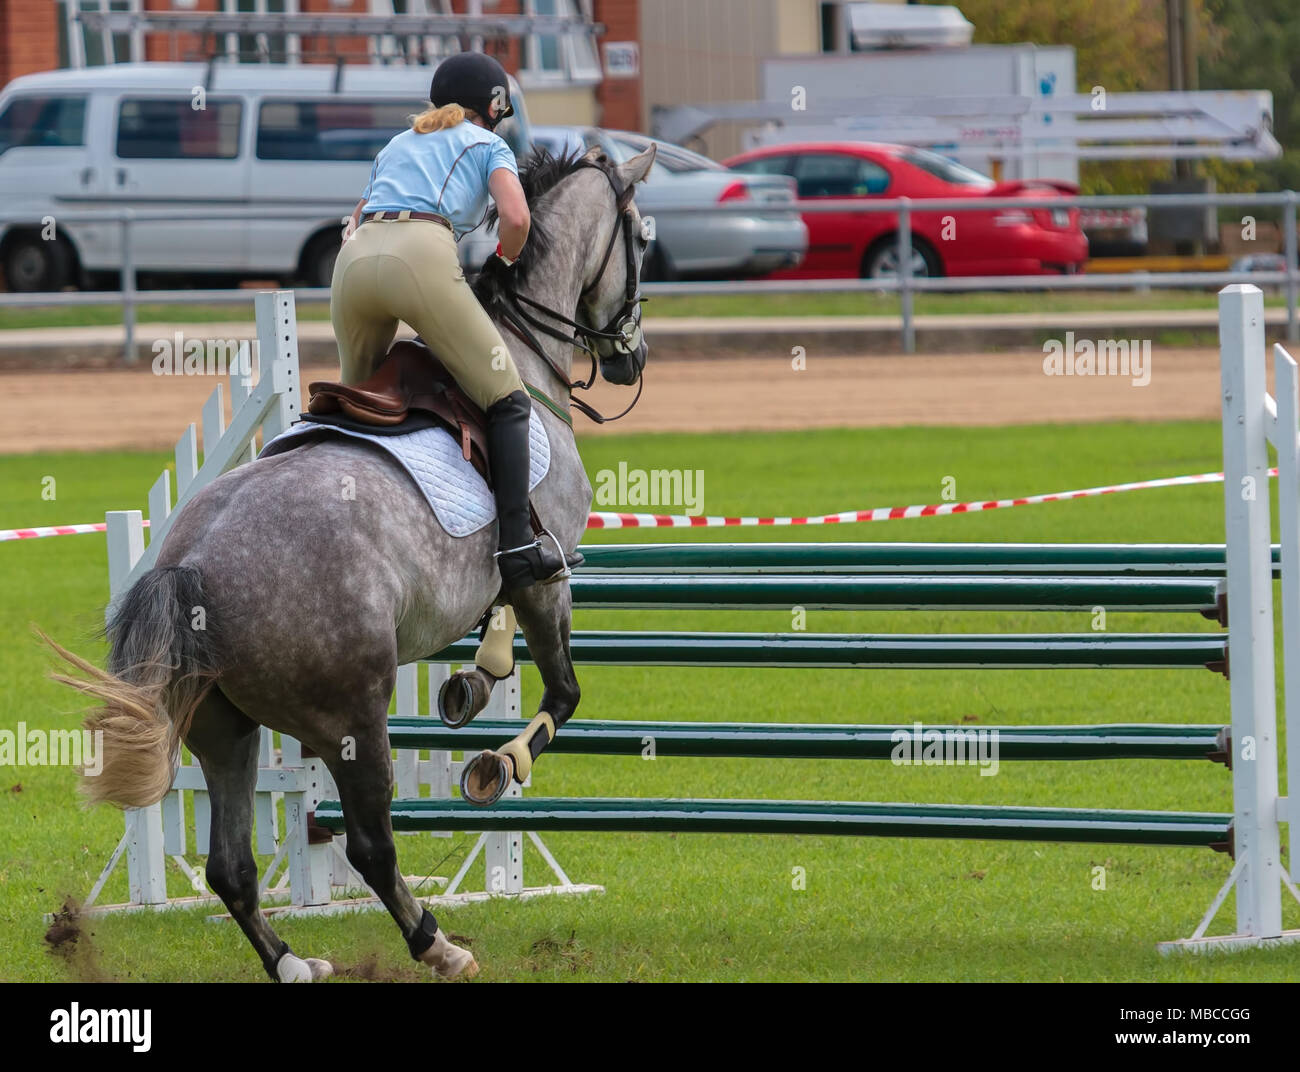 A horse jumping a barrier Stock Photo